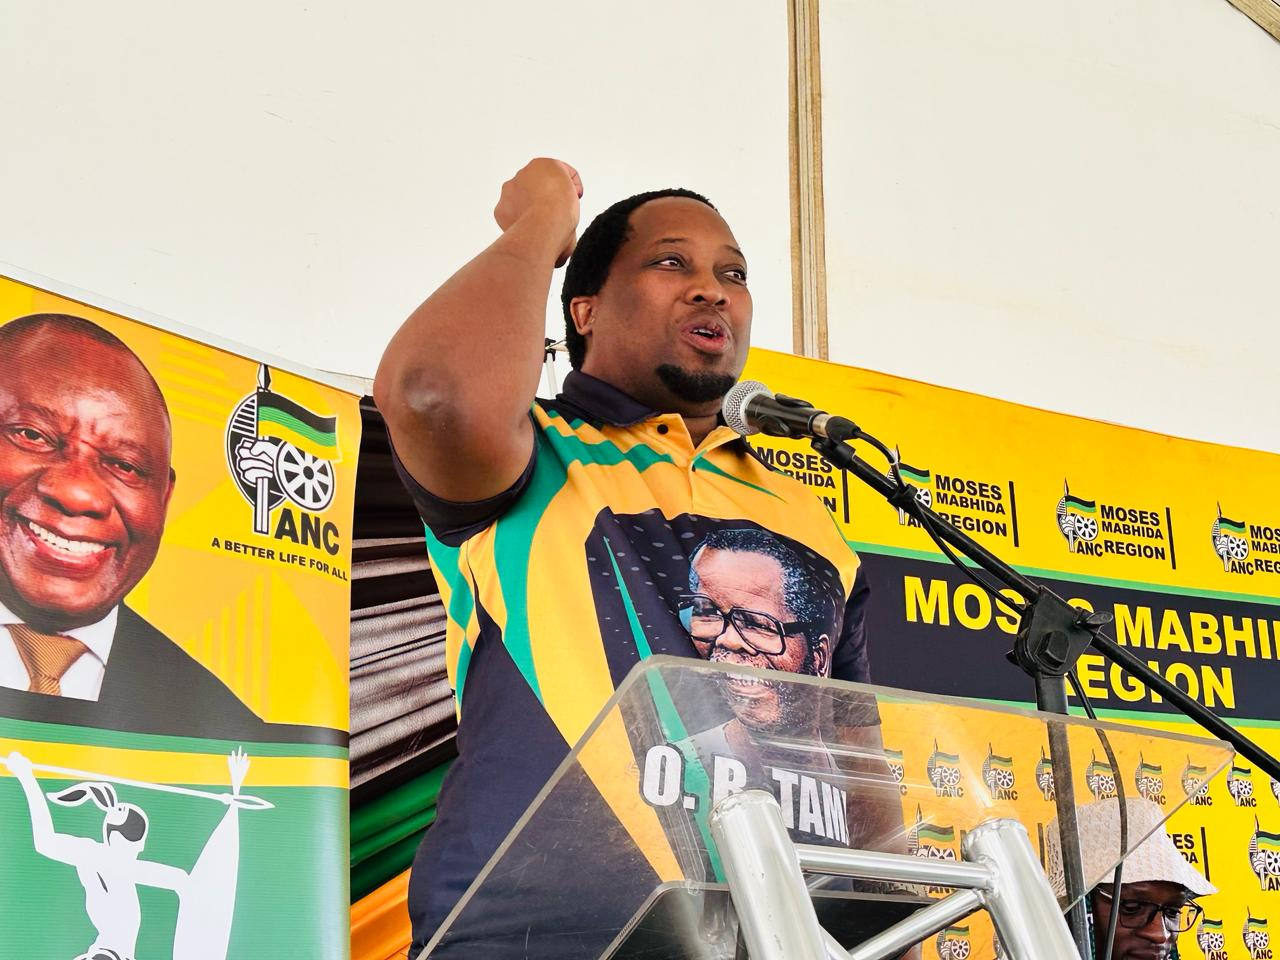 INTERVIEW: ANC'S SAMORA NDLOVU RESPONDS TO ALLEGATIONS BY SUSPENDED MSUNDUZI MUNICIPAL MANAGER